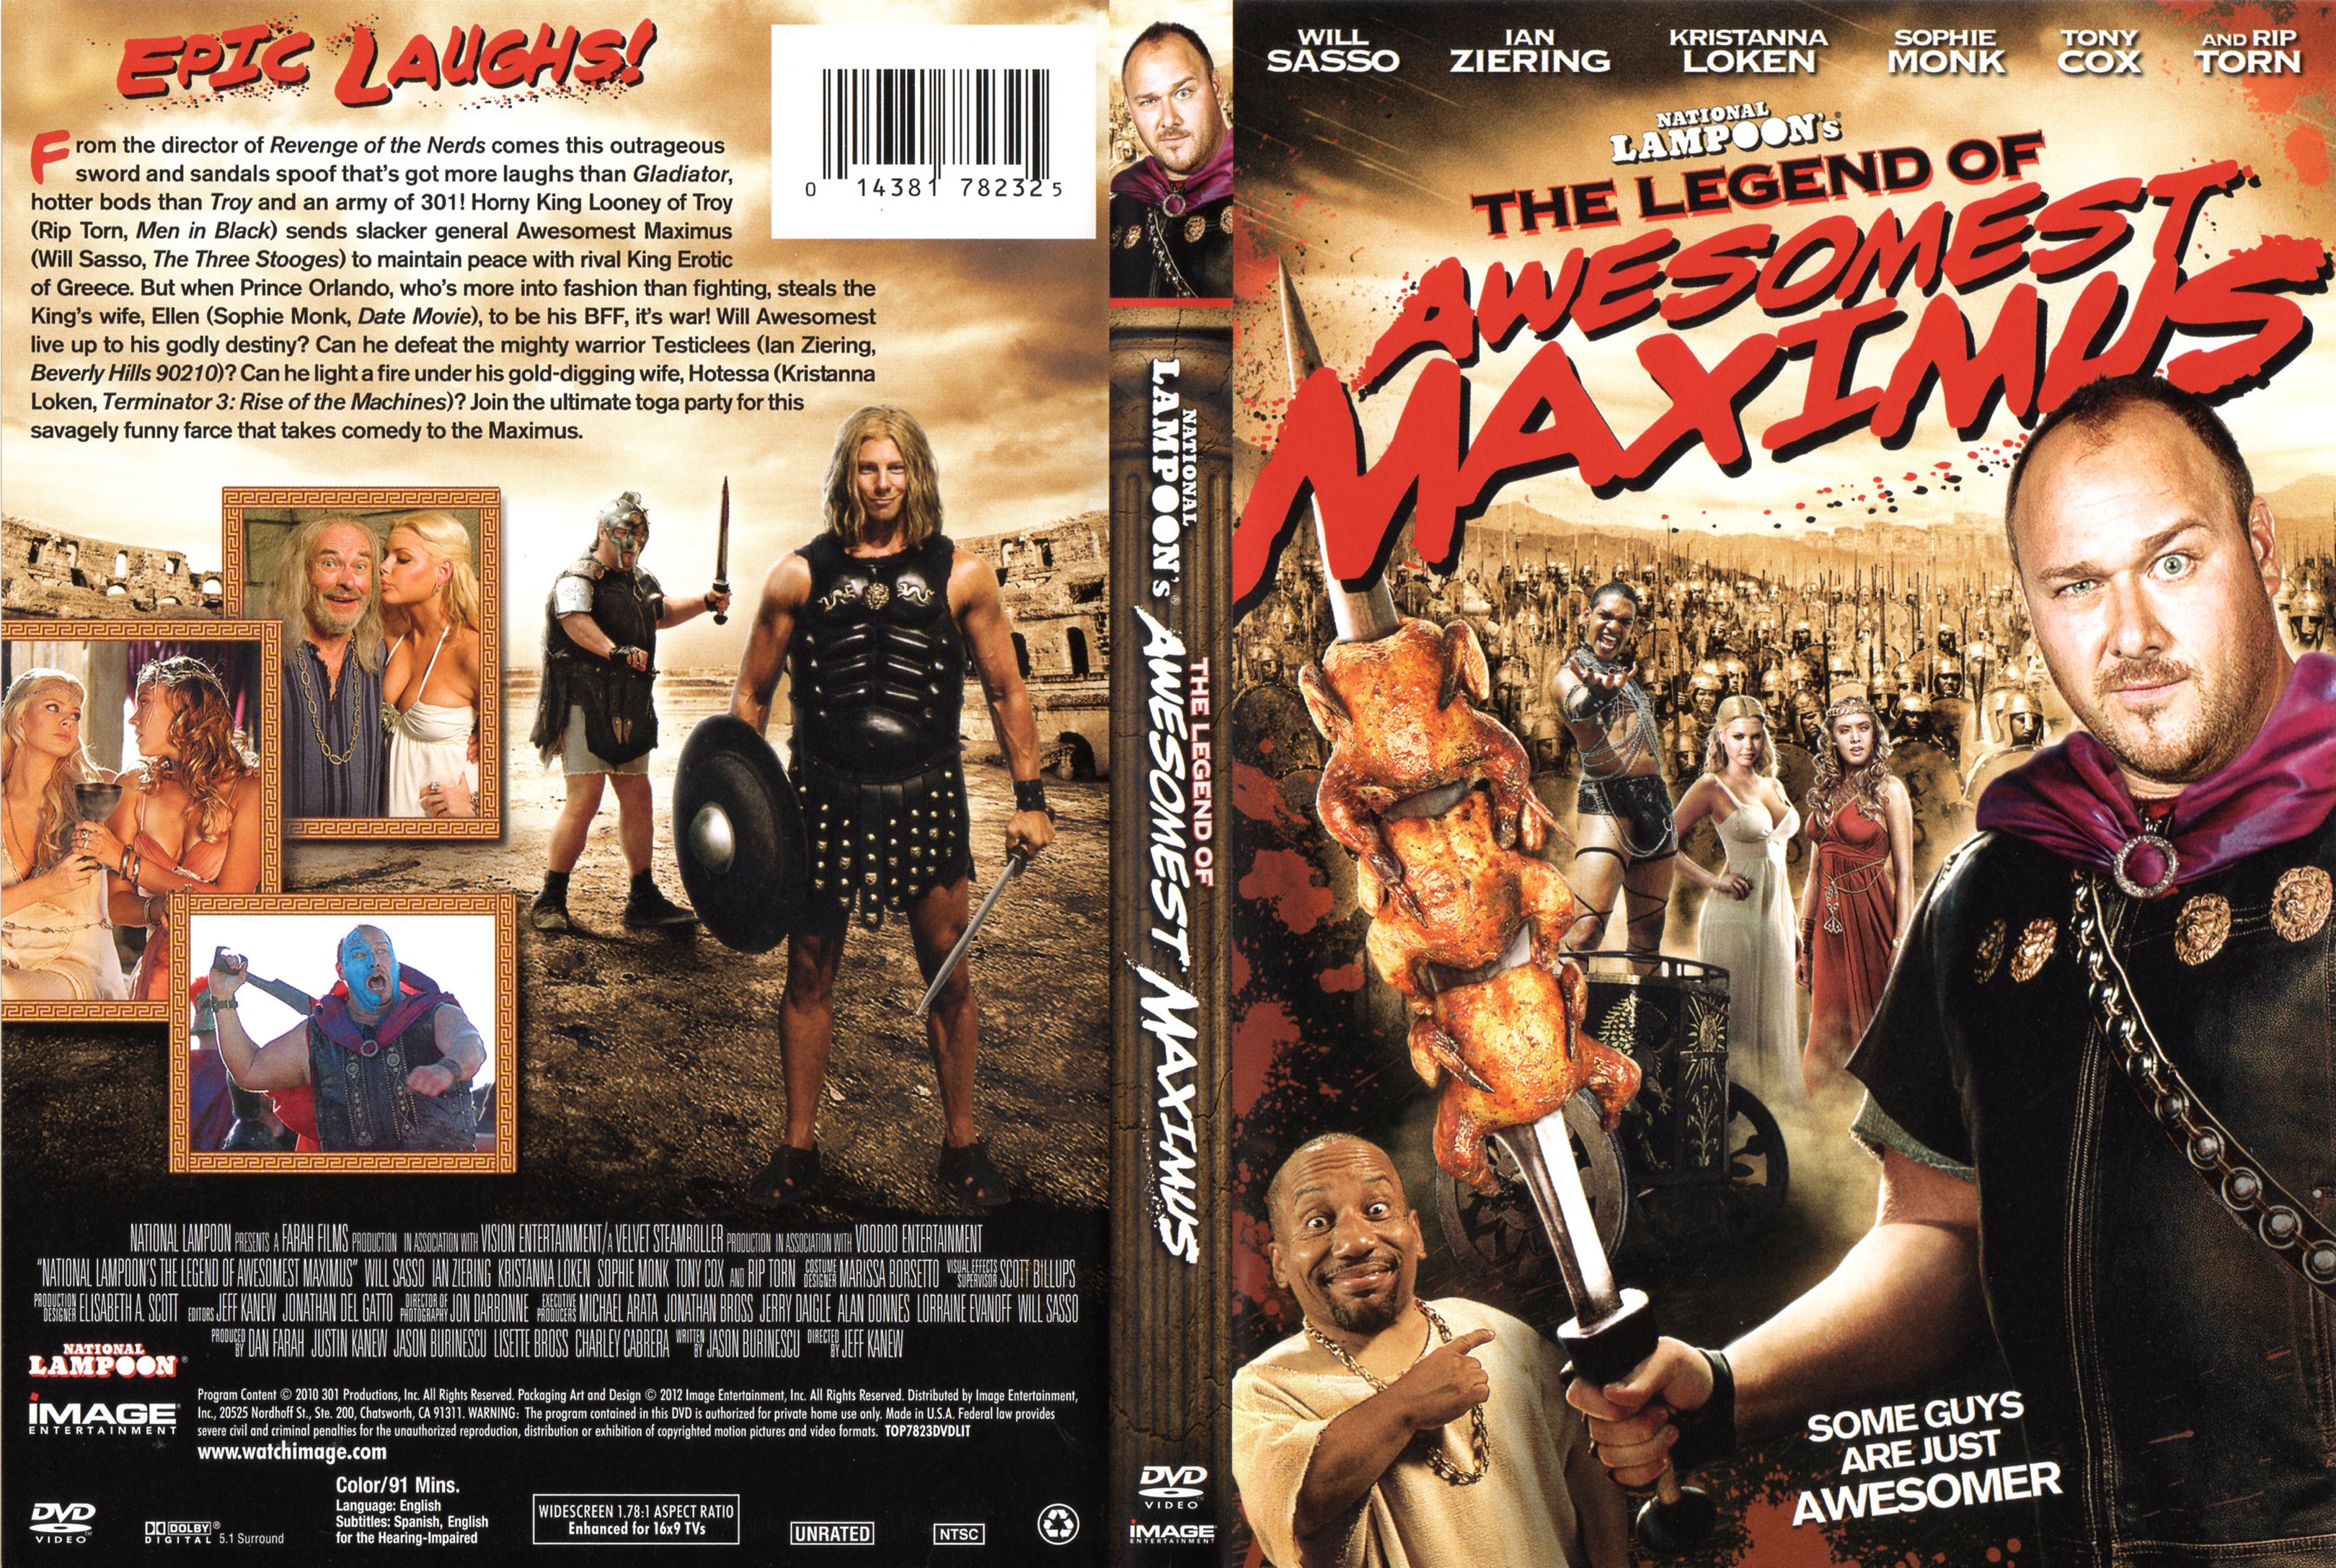 the legend of awesomest maximus (2011) - front back.